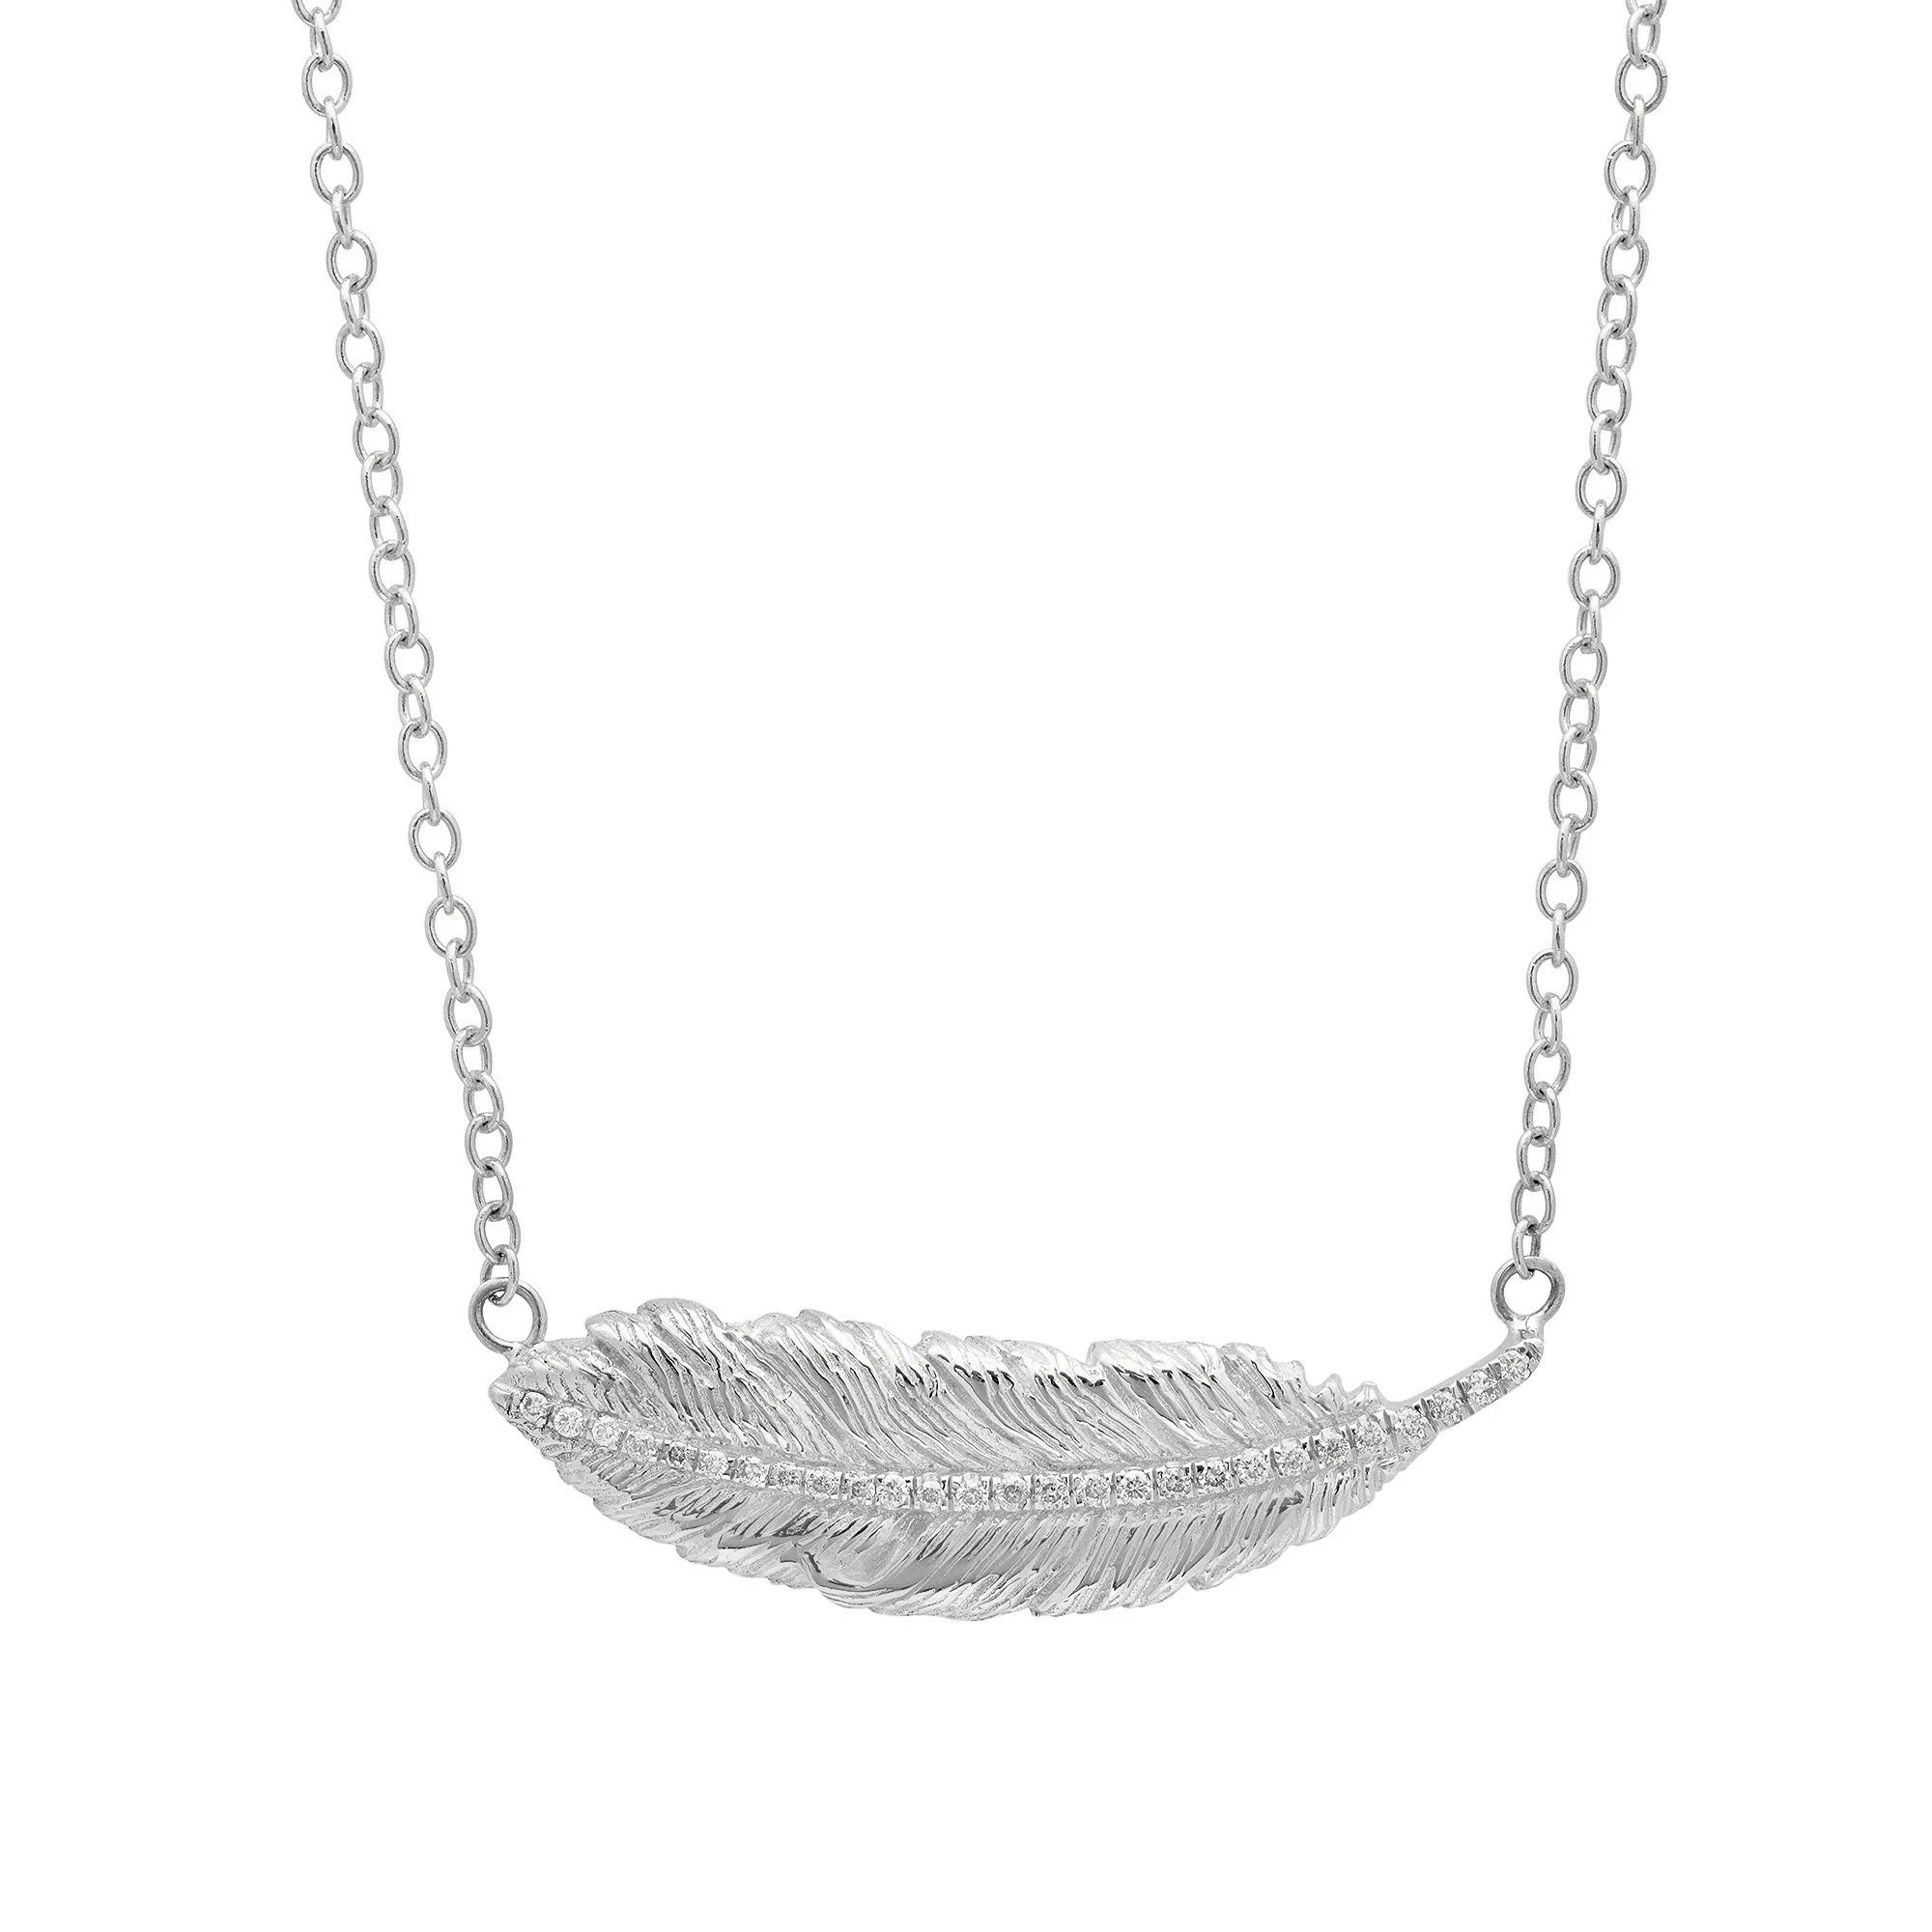 Small Feather Necklace Pendant Elisabeth Bell Jewelry White Gold  